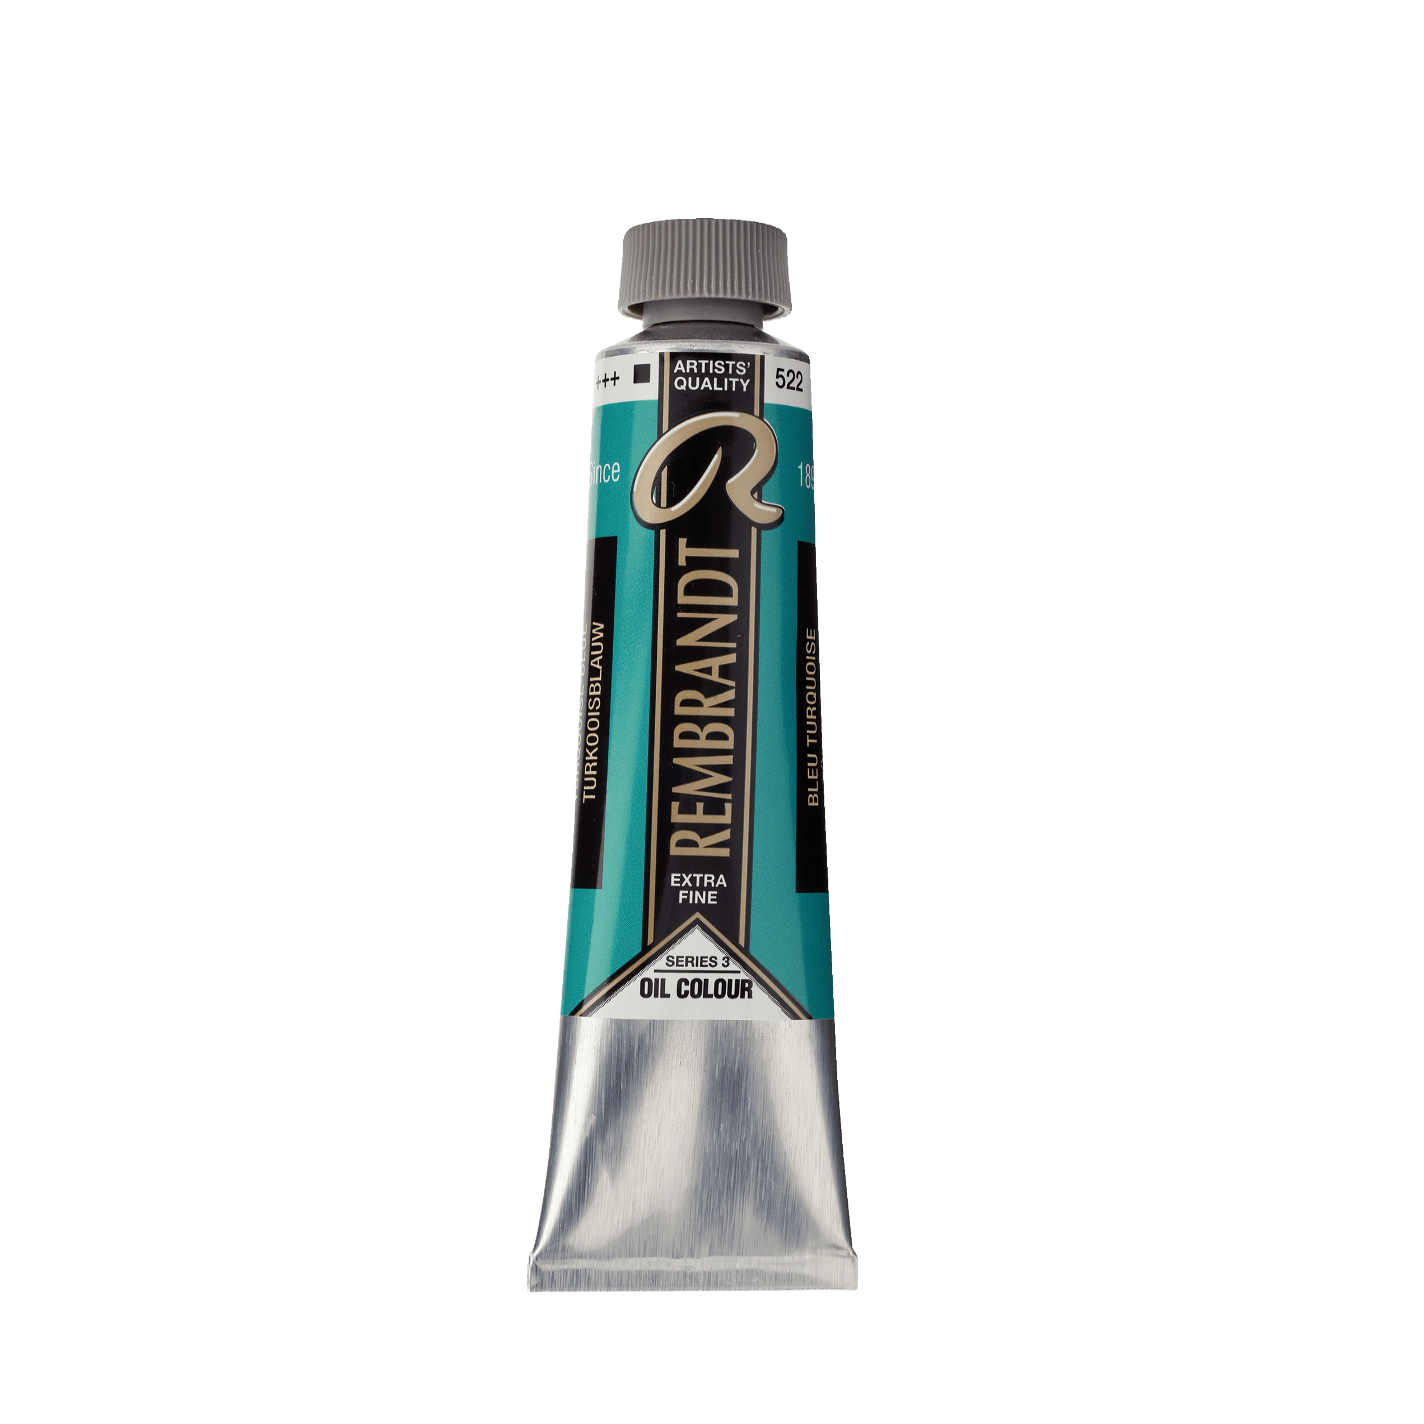 Rembrandt Oliemaling 40ml Turquoise Blue